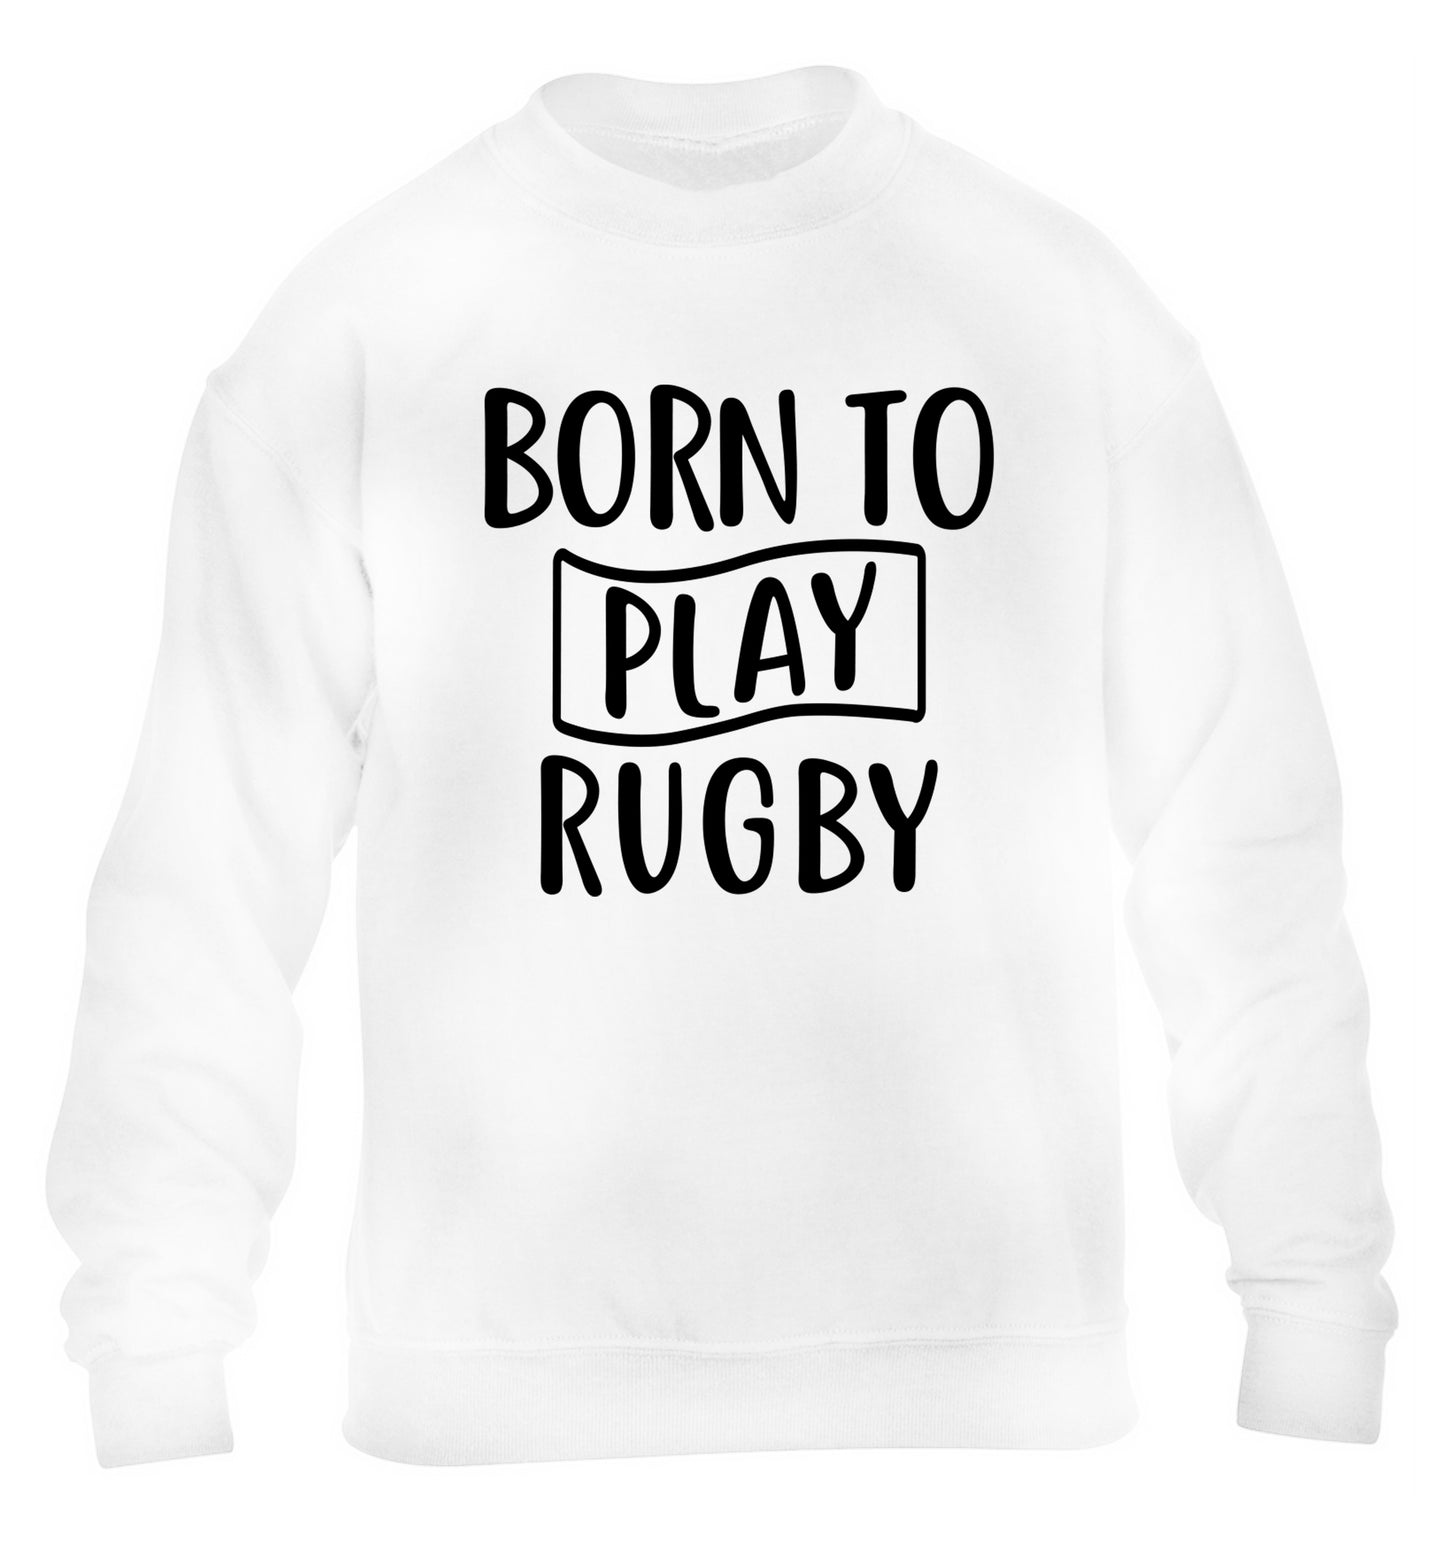 Born to play rugby children's white sweater 12-13 Years